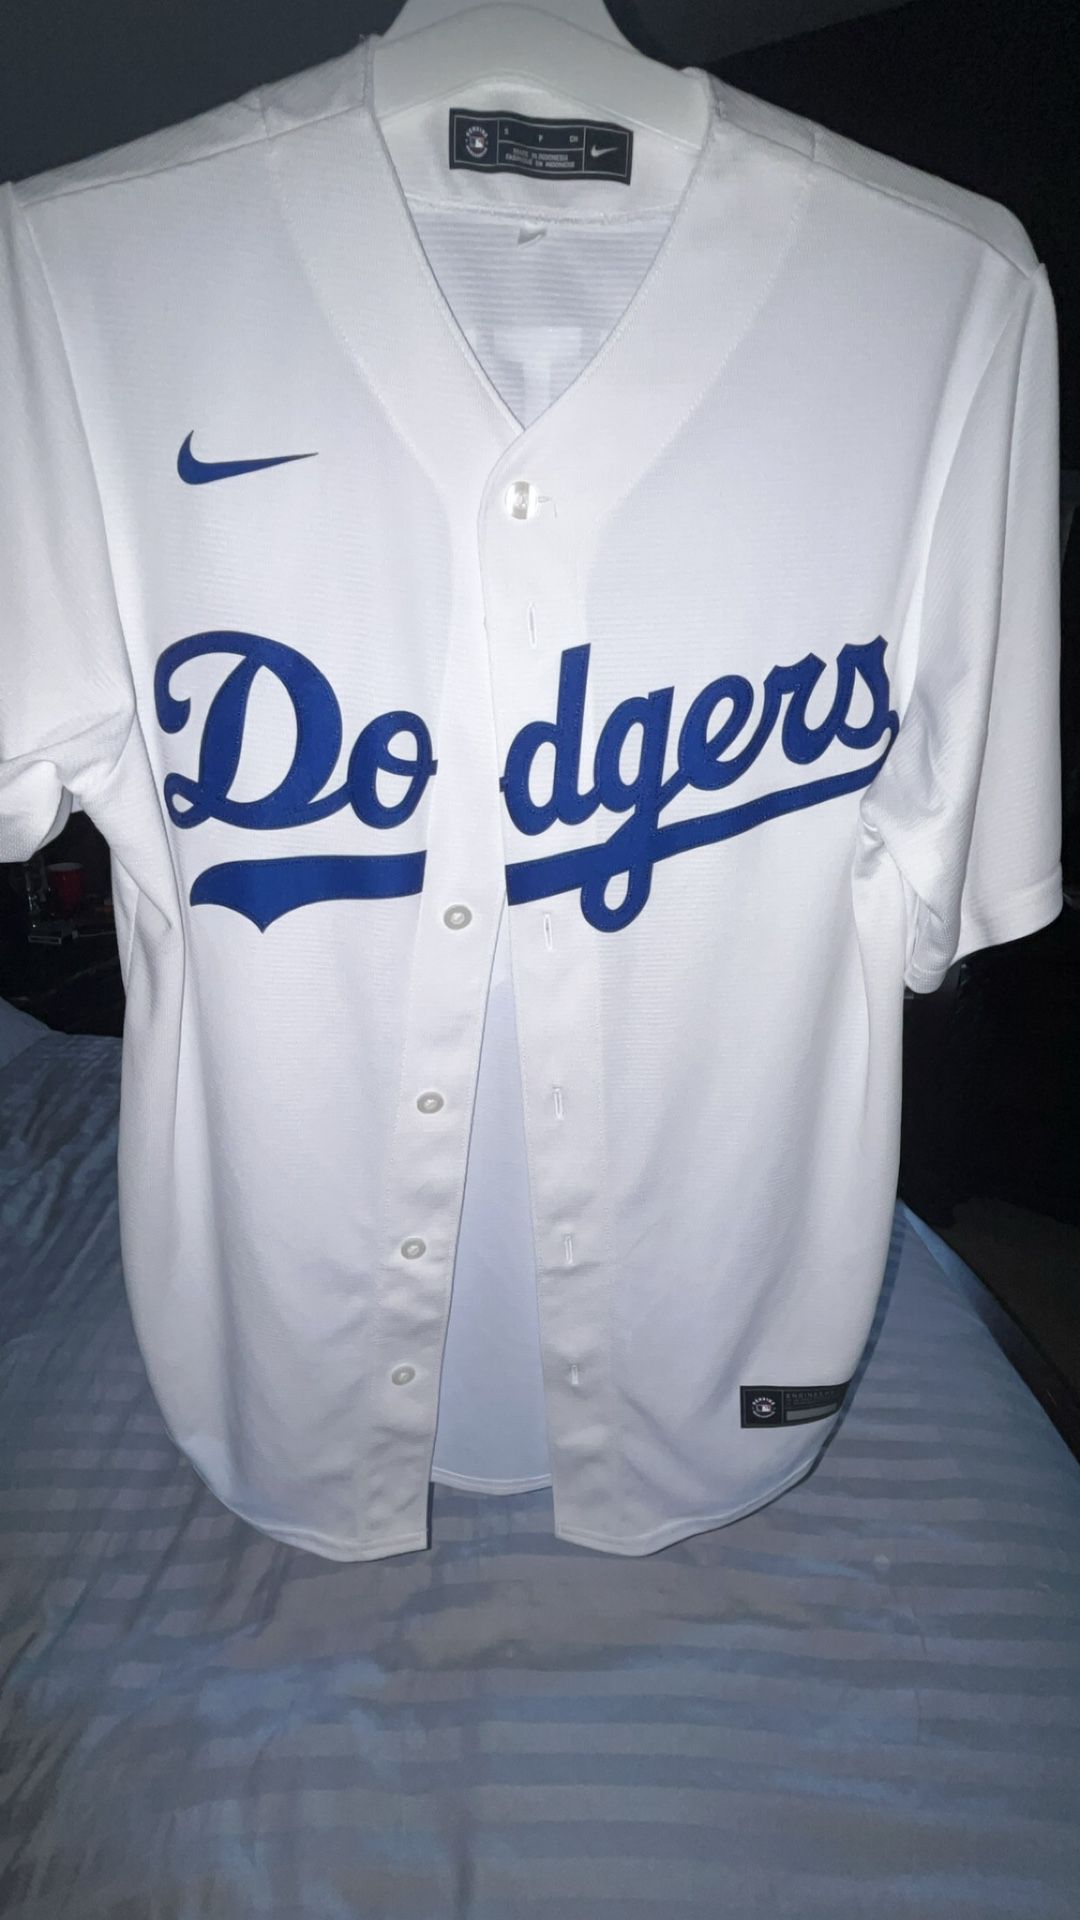 Mookie Betts Dodgers Home Jersey